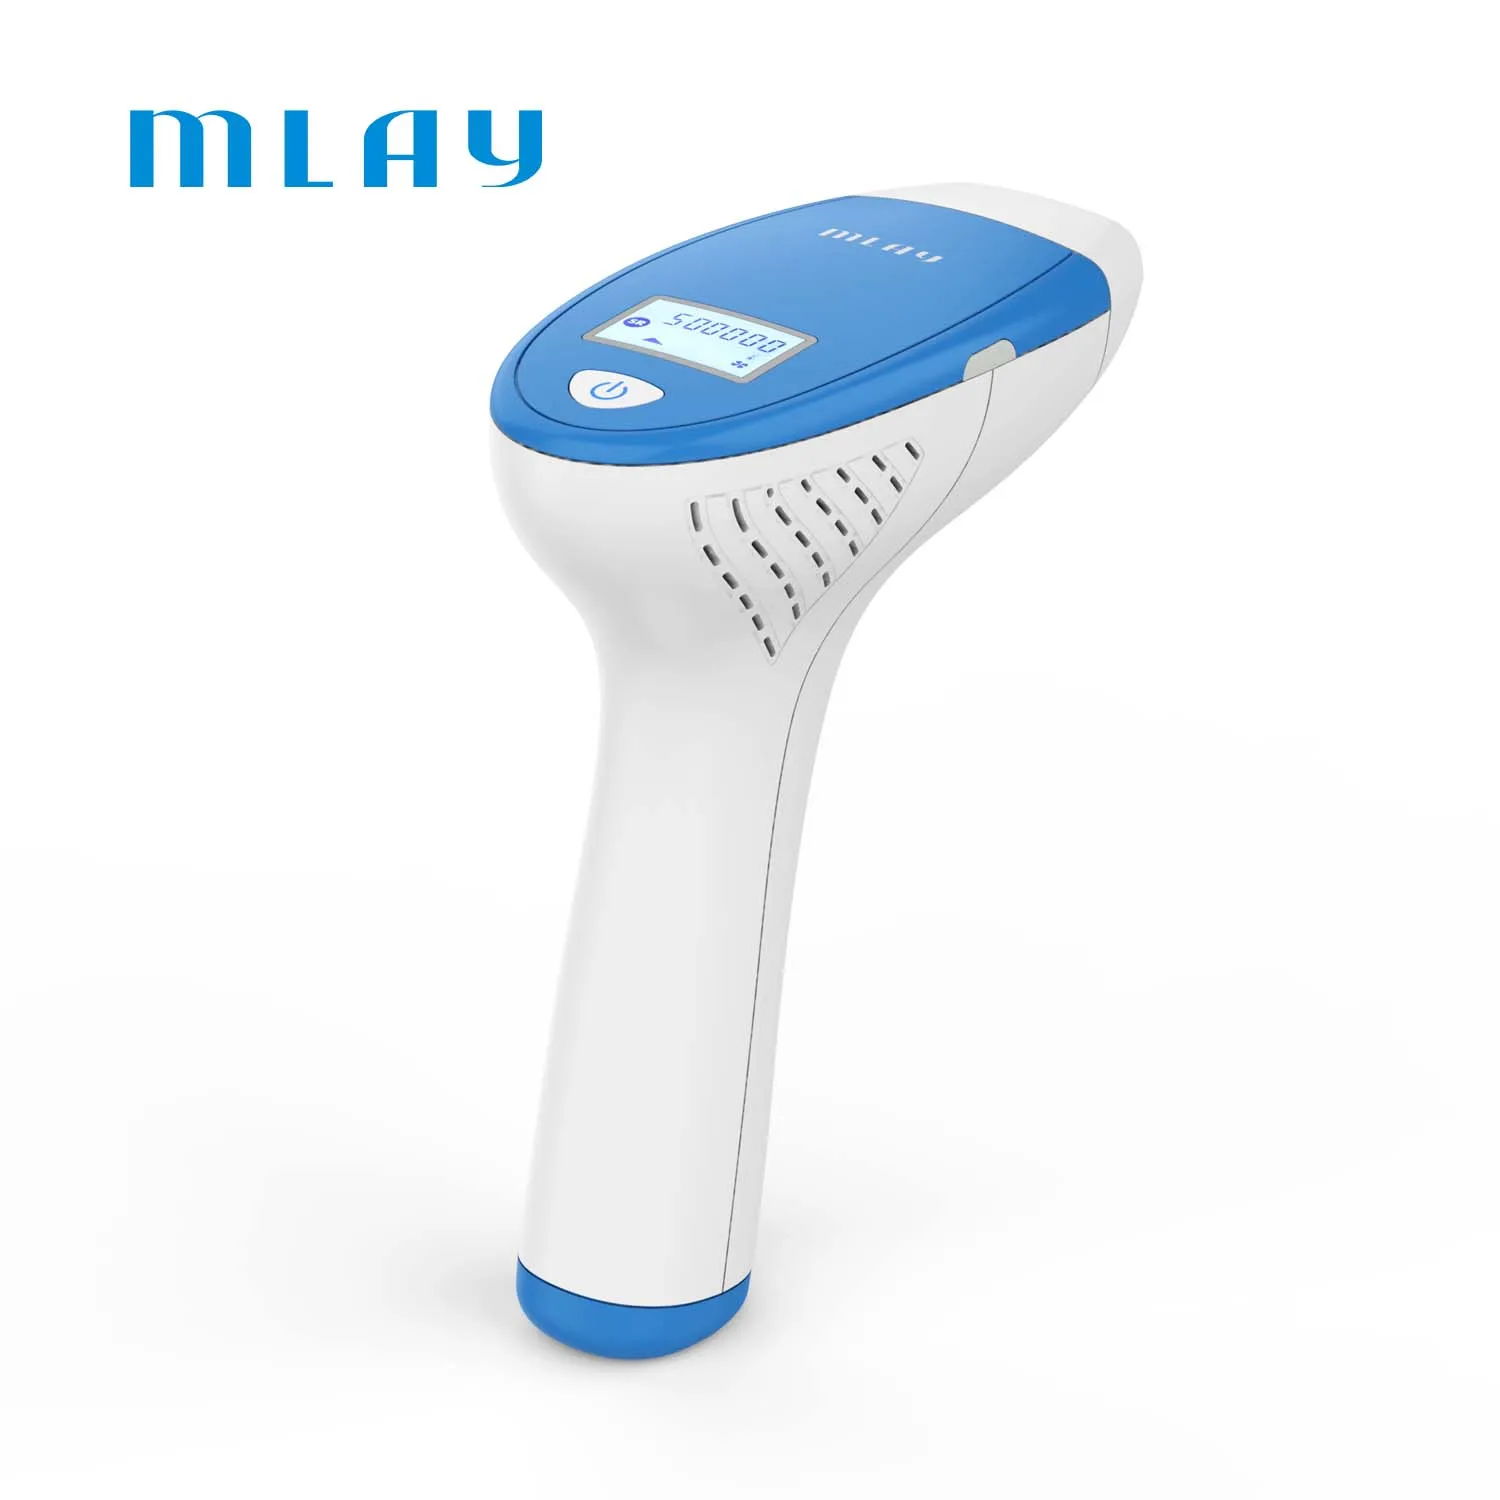 

2020 MLAY IPL Laser Hair Removal Home Use Personal Use Beauty Device For Whole Body Skin Rejuvenation Acne Clearance, Pink blue green